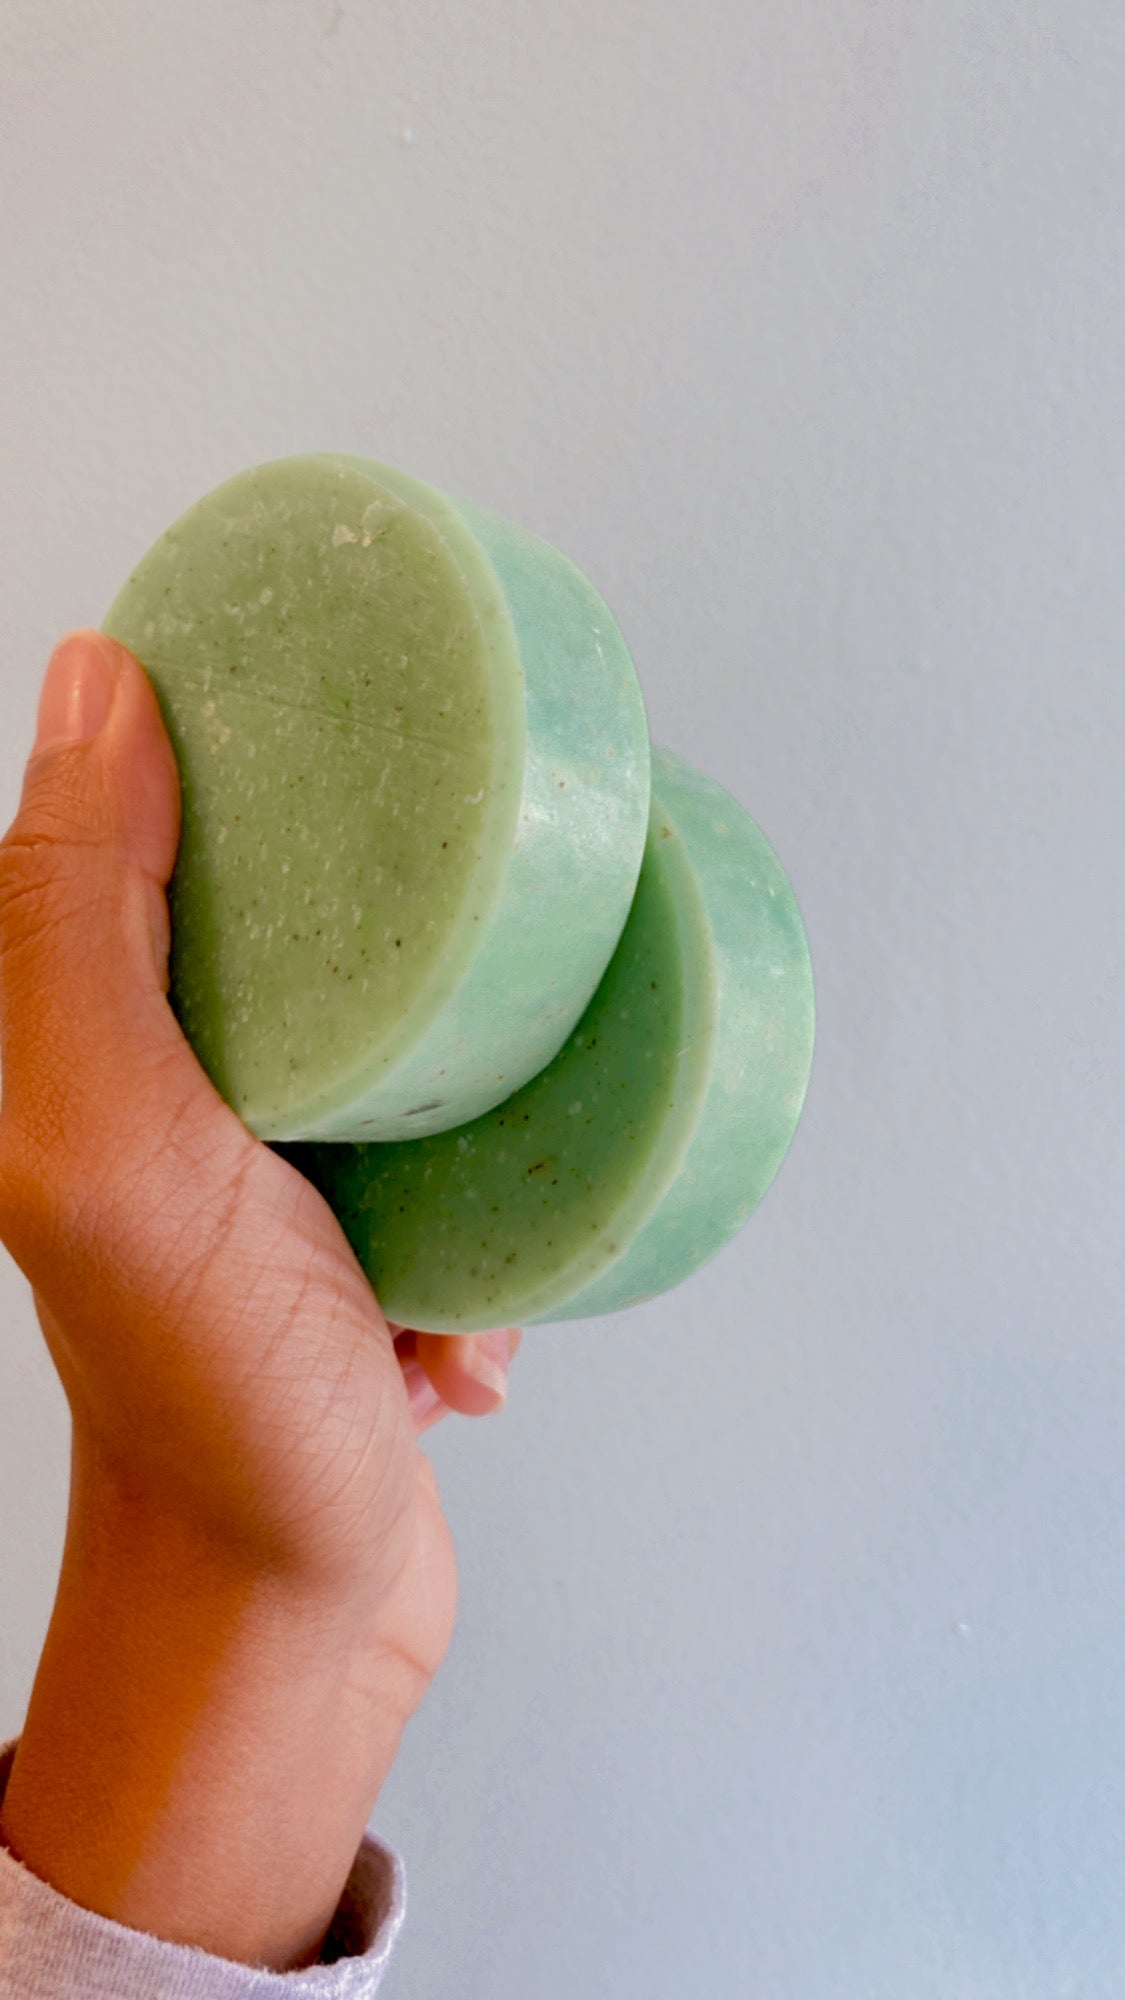 "Rosemary Mint" Herbal Infused Soap Bars